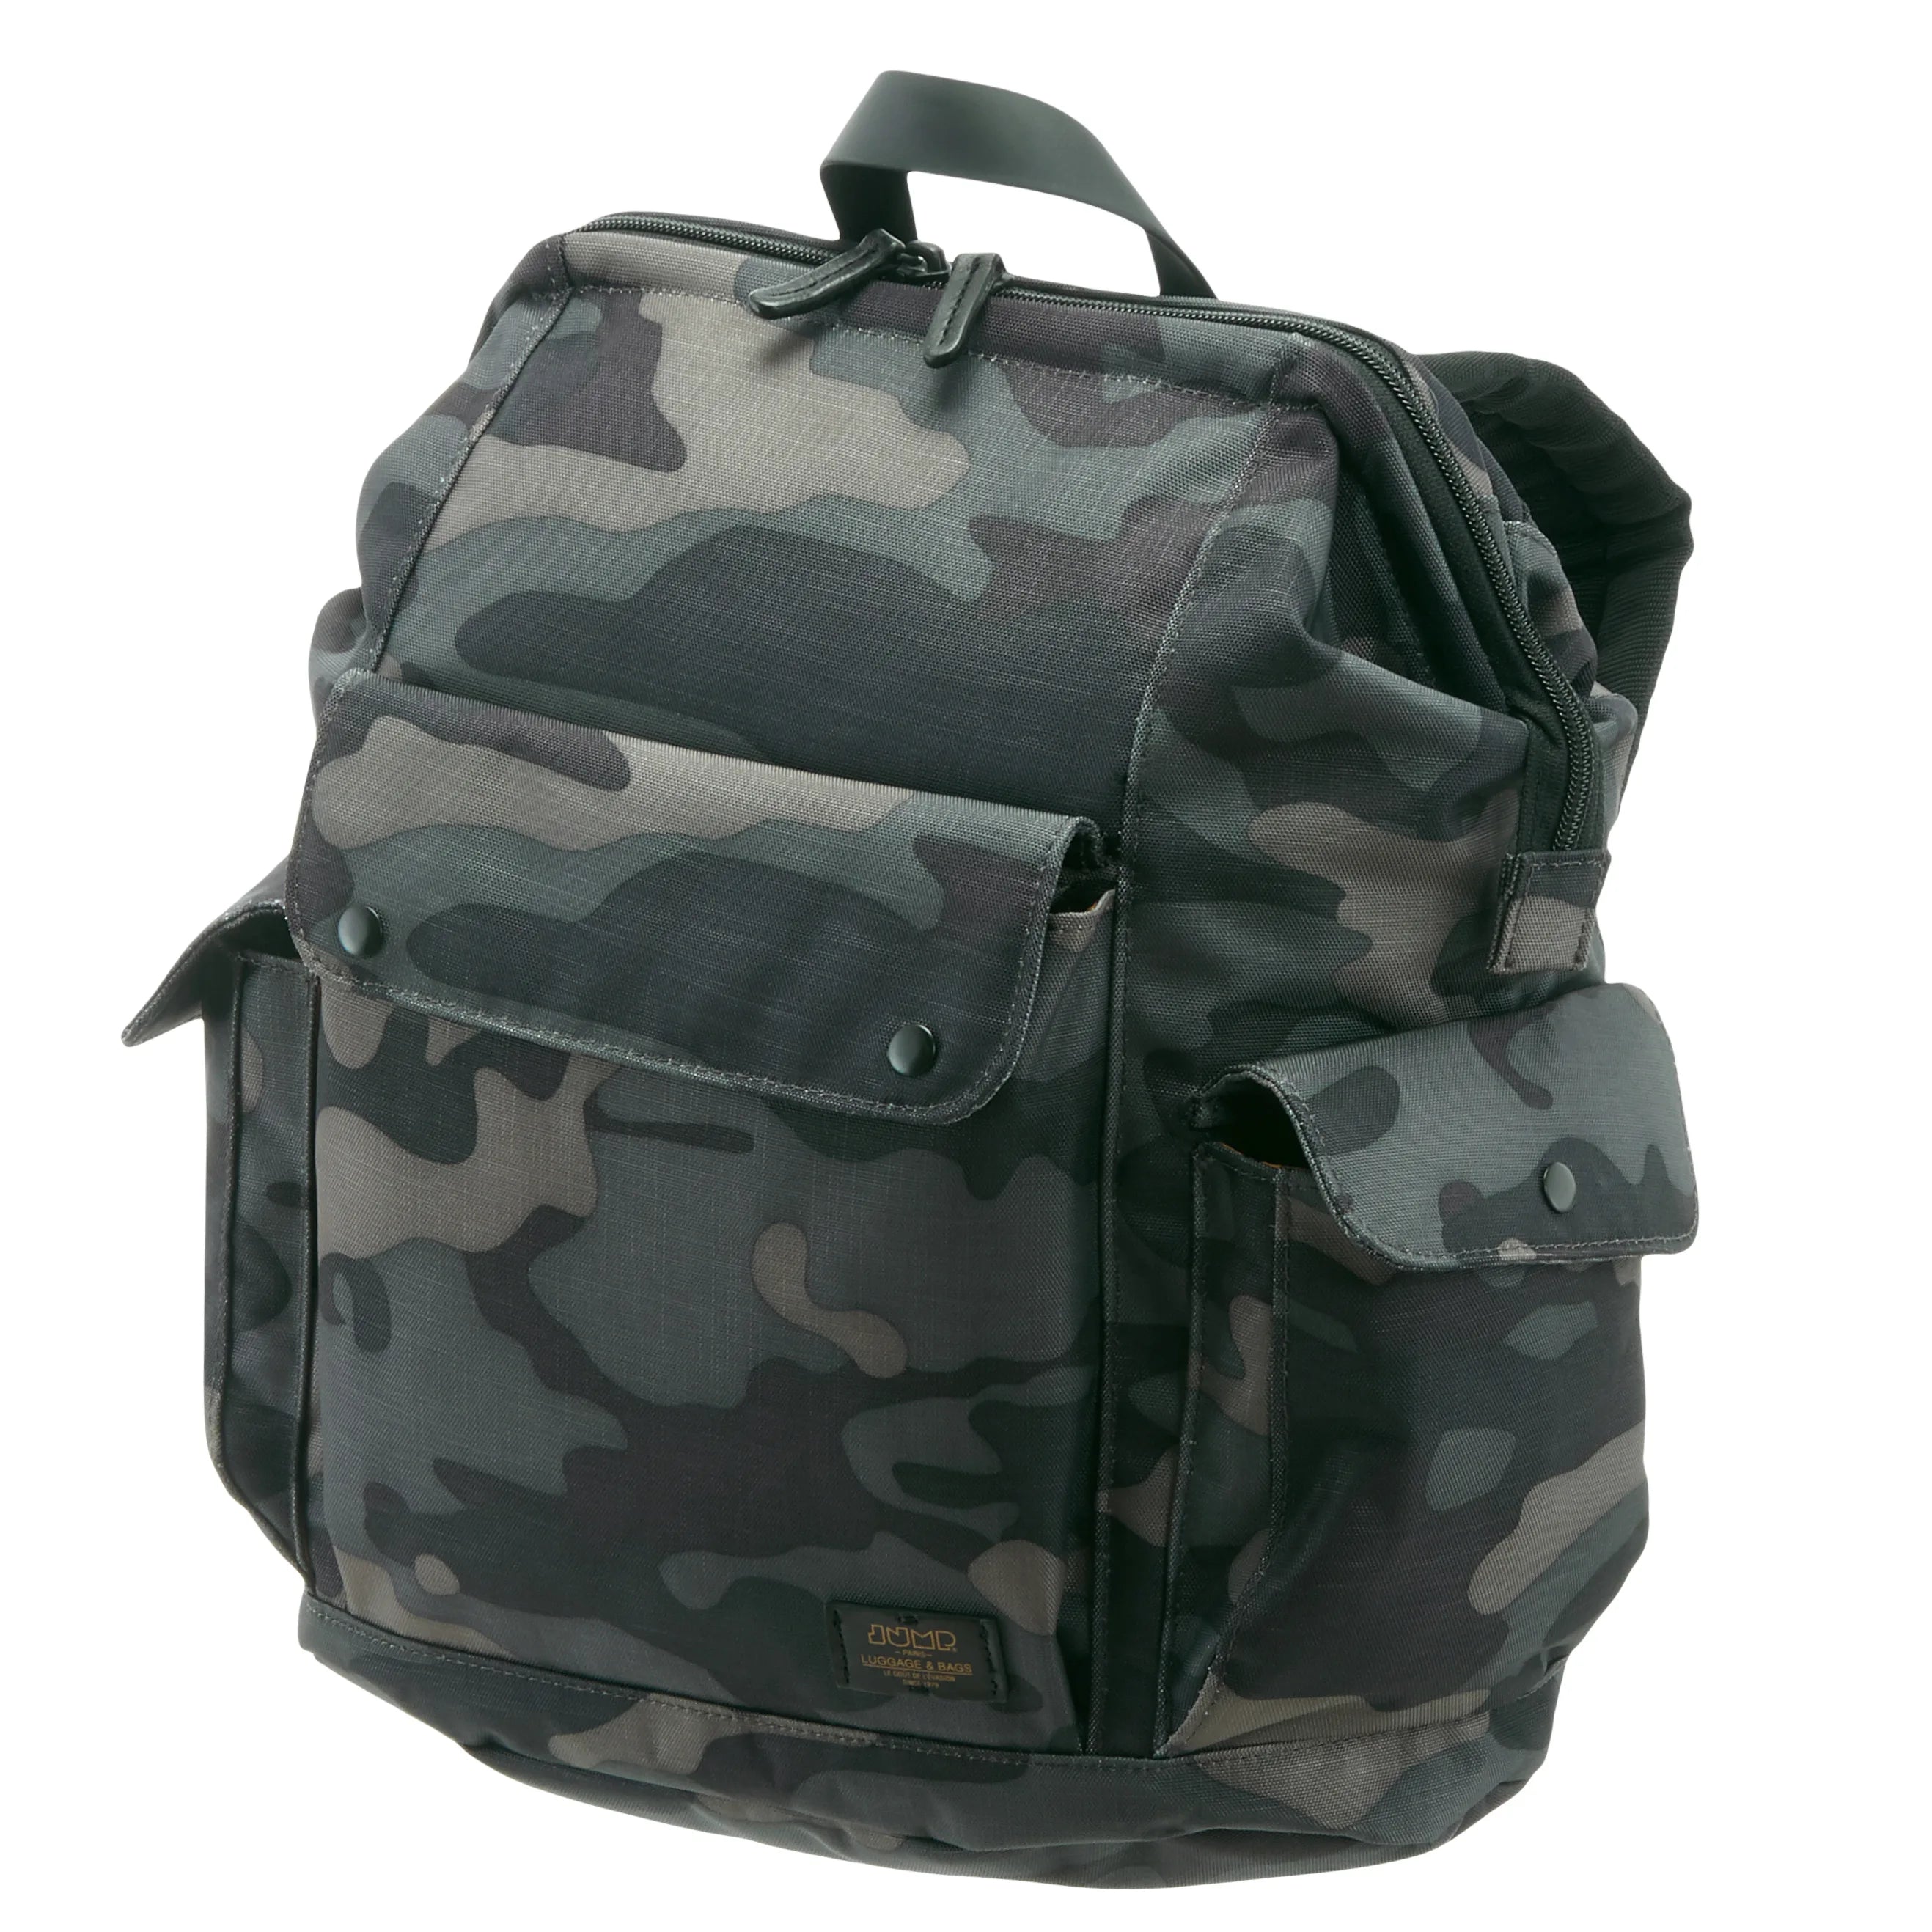 Jump Bleecker Squaremouth Backpack 36 cm - camouflage